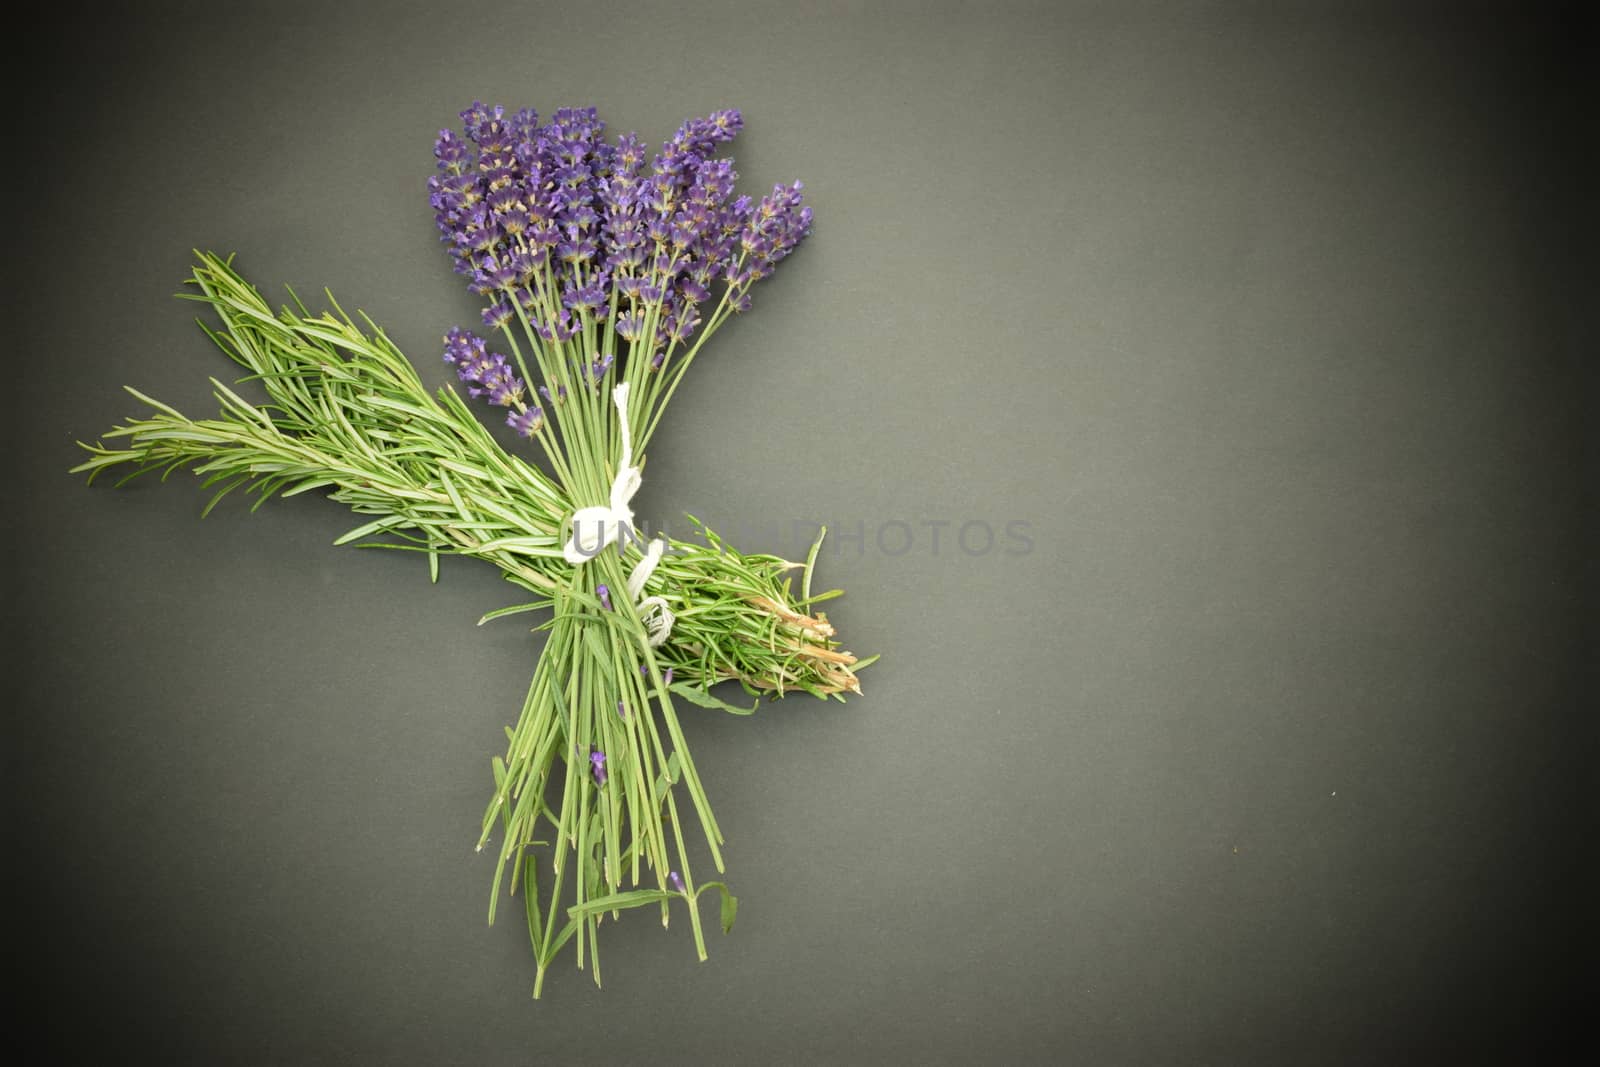 Bunch of handpicked Rosemary and lavender by sarahdavies576@gmail.com